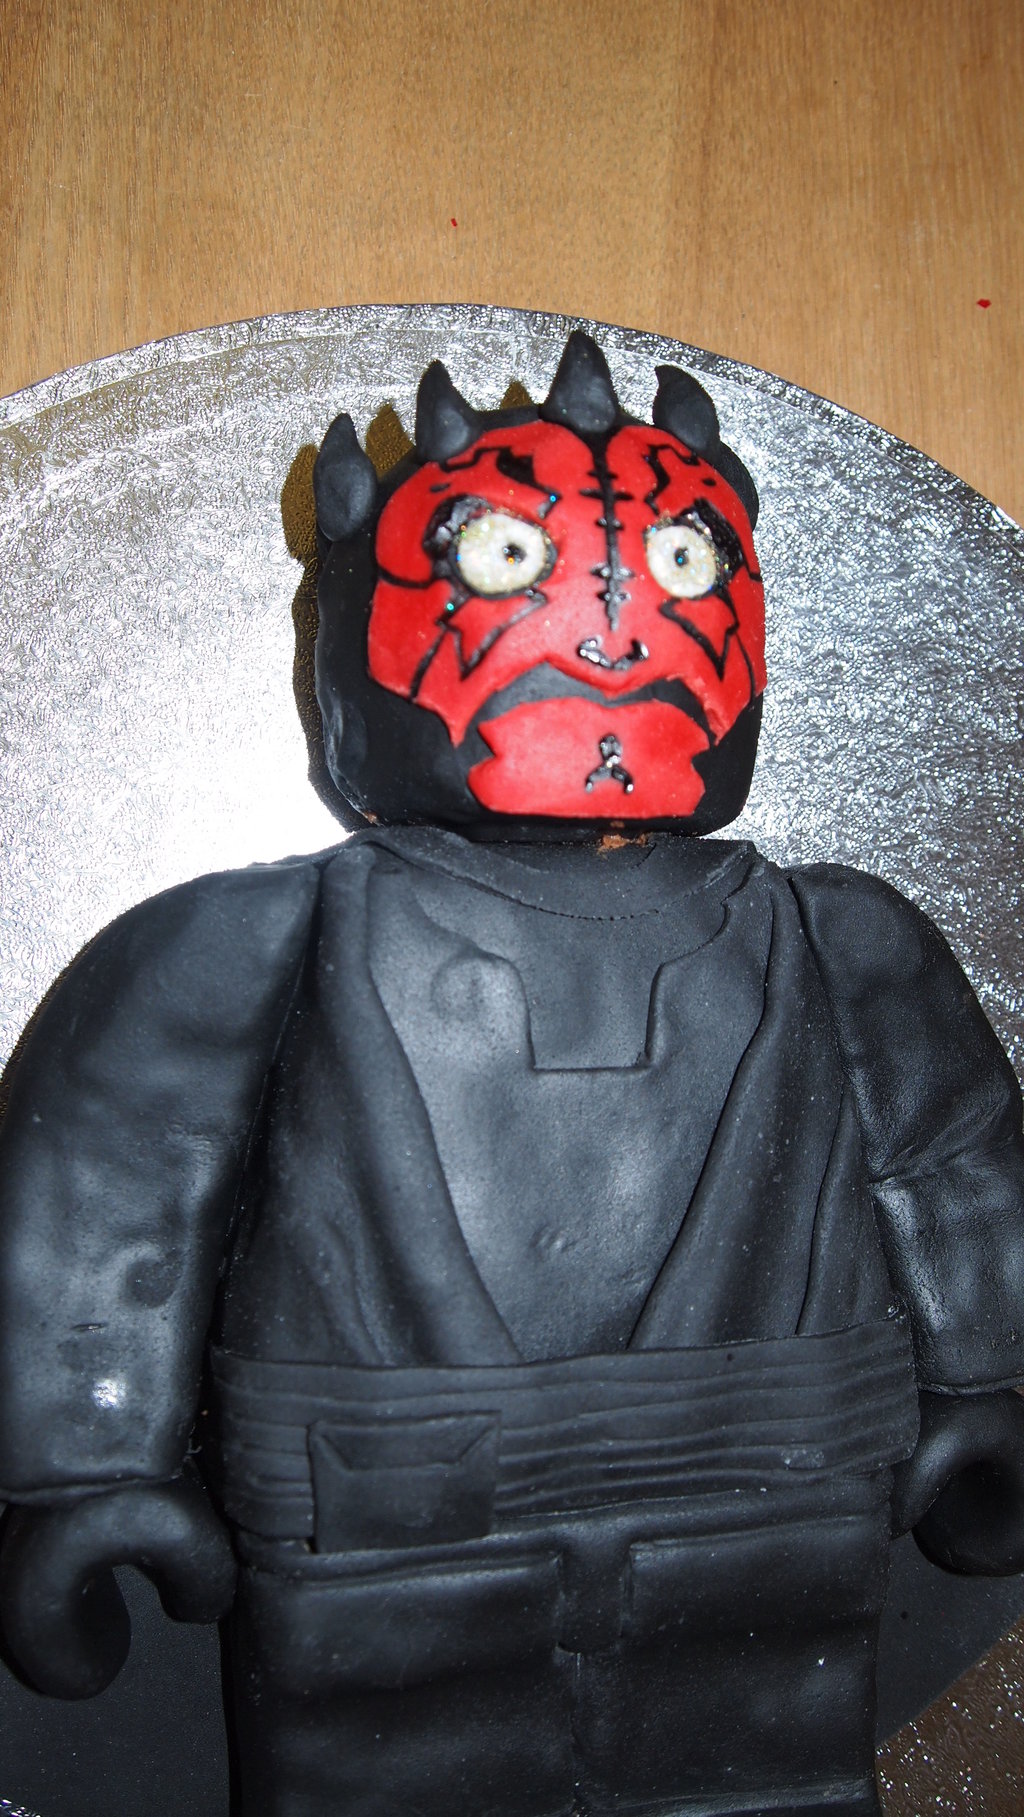 Lego Darth Maul Cake By Bevismusson